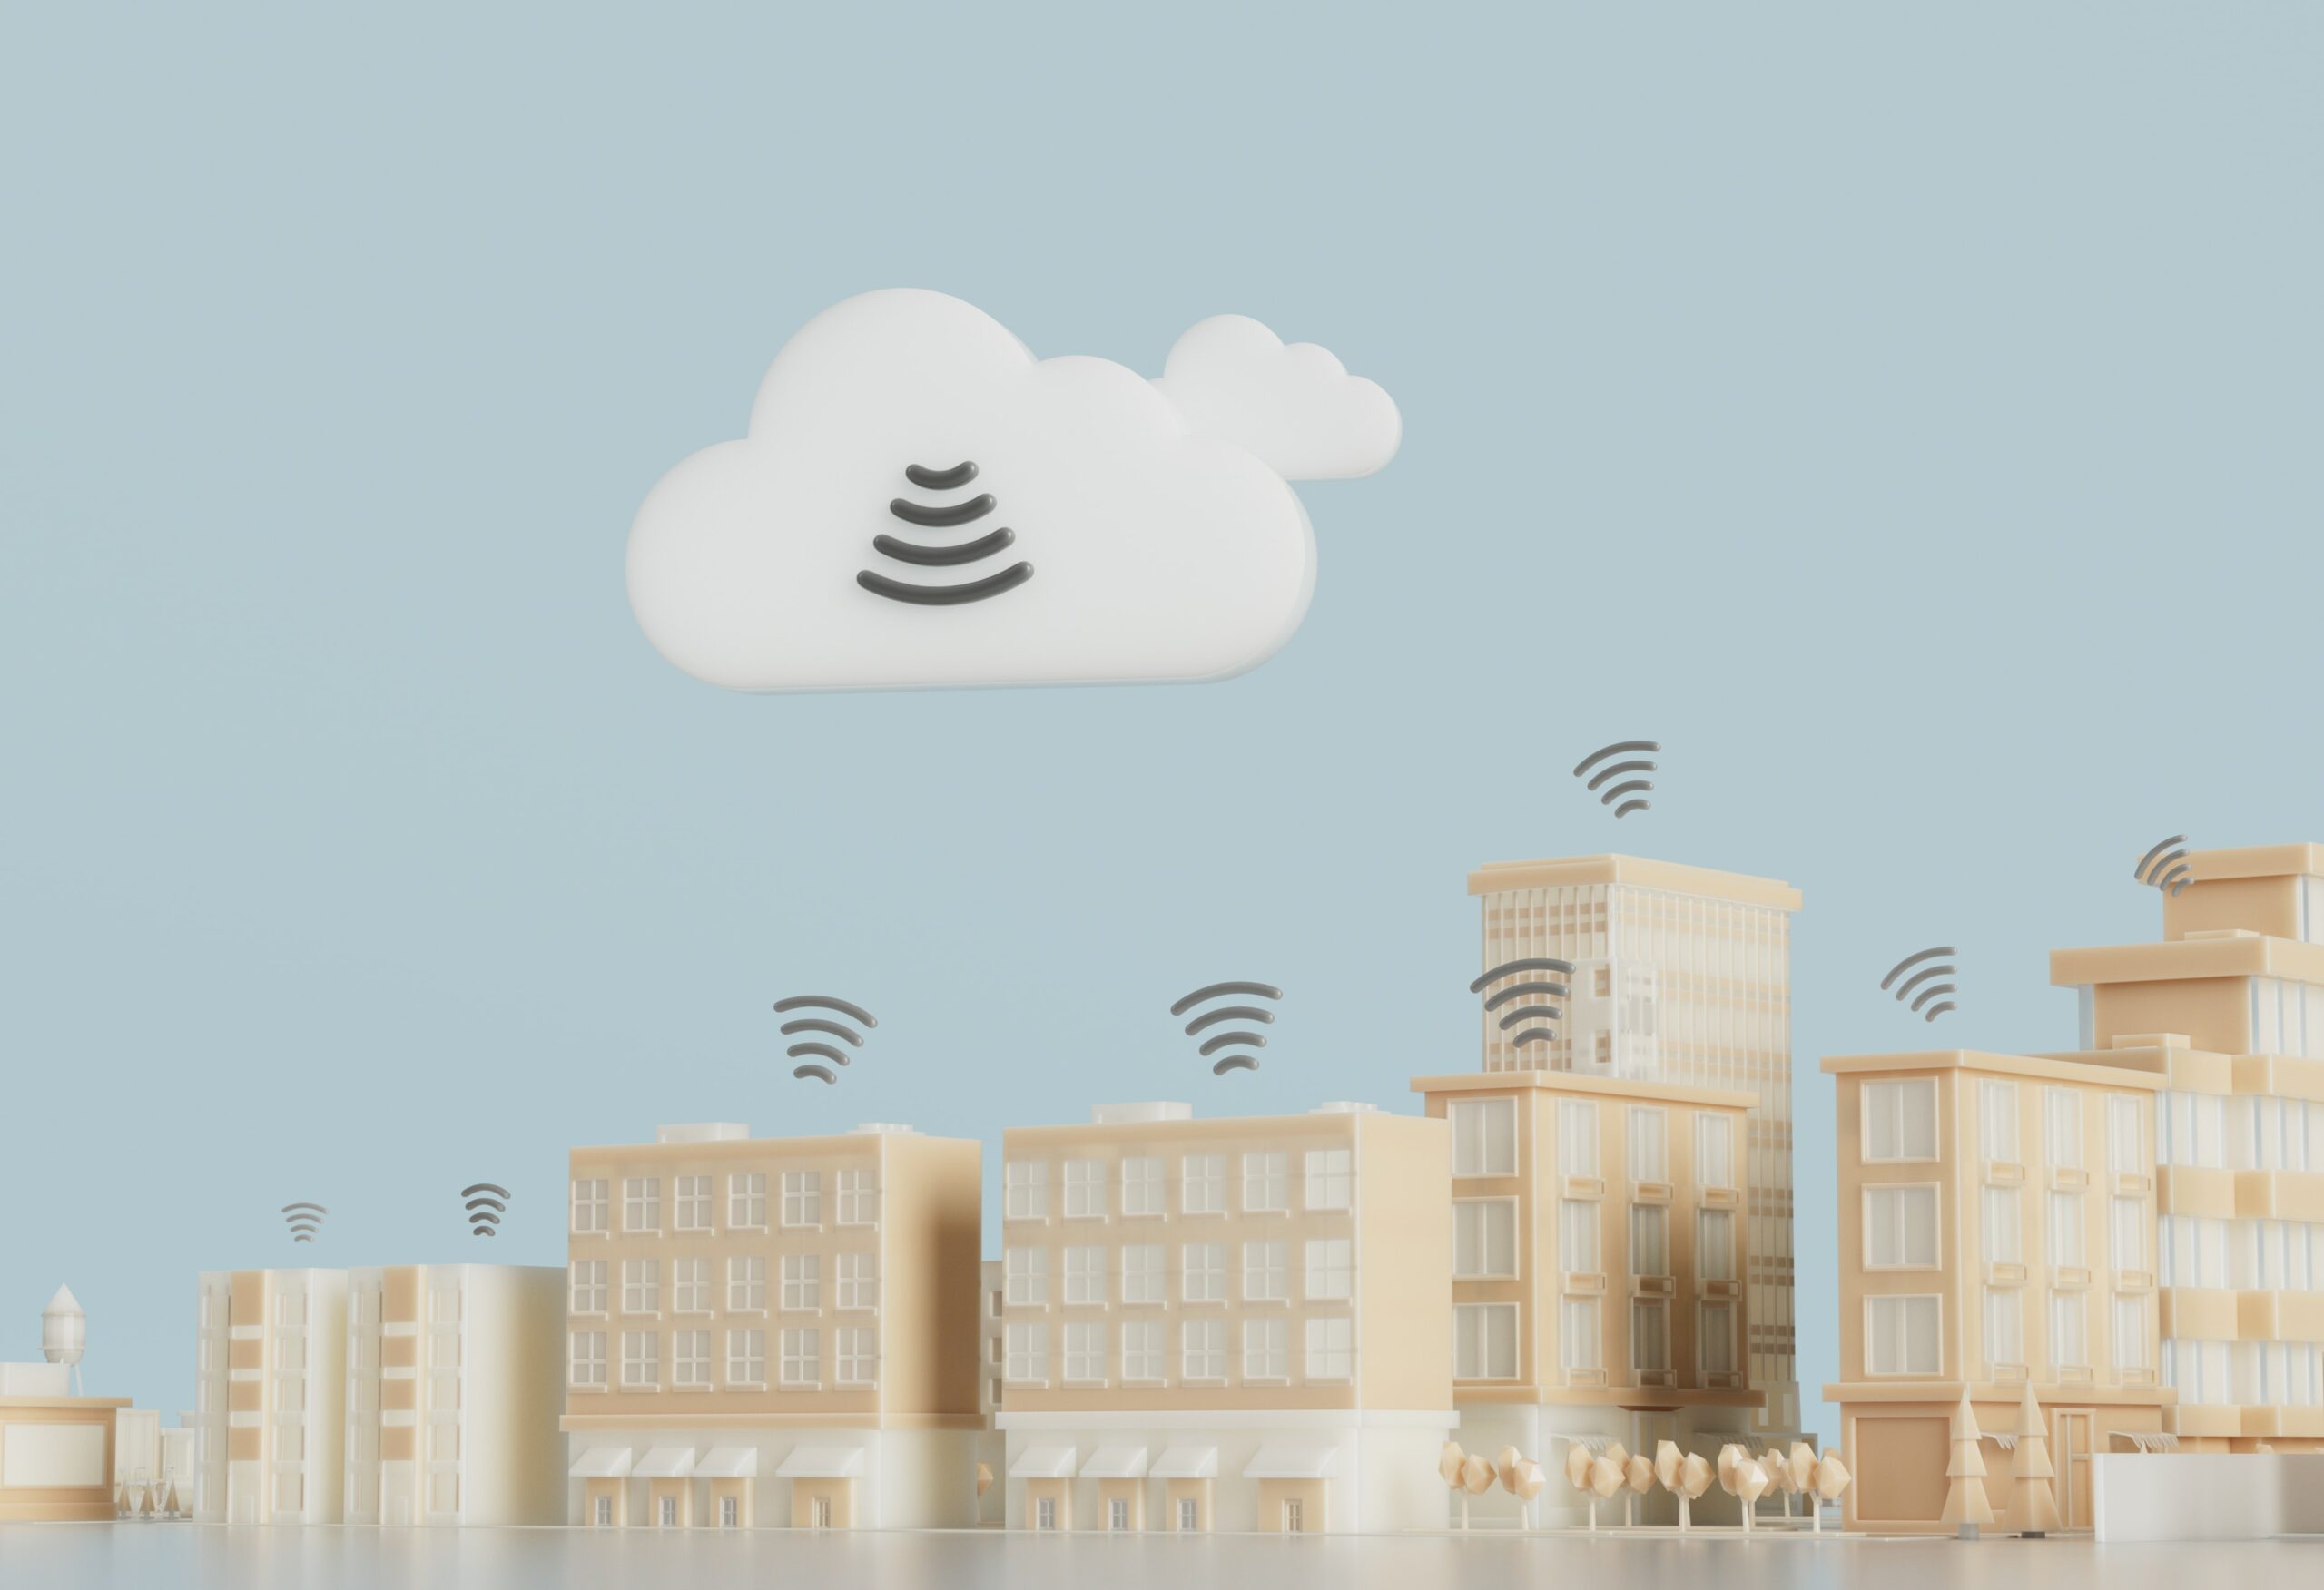 A 3d model of a city with wi-fi towers and a cloud, showcasing file synchronization using Dropbox.